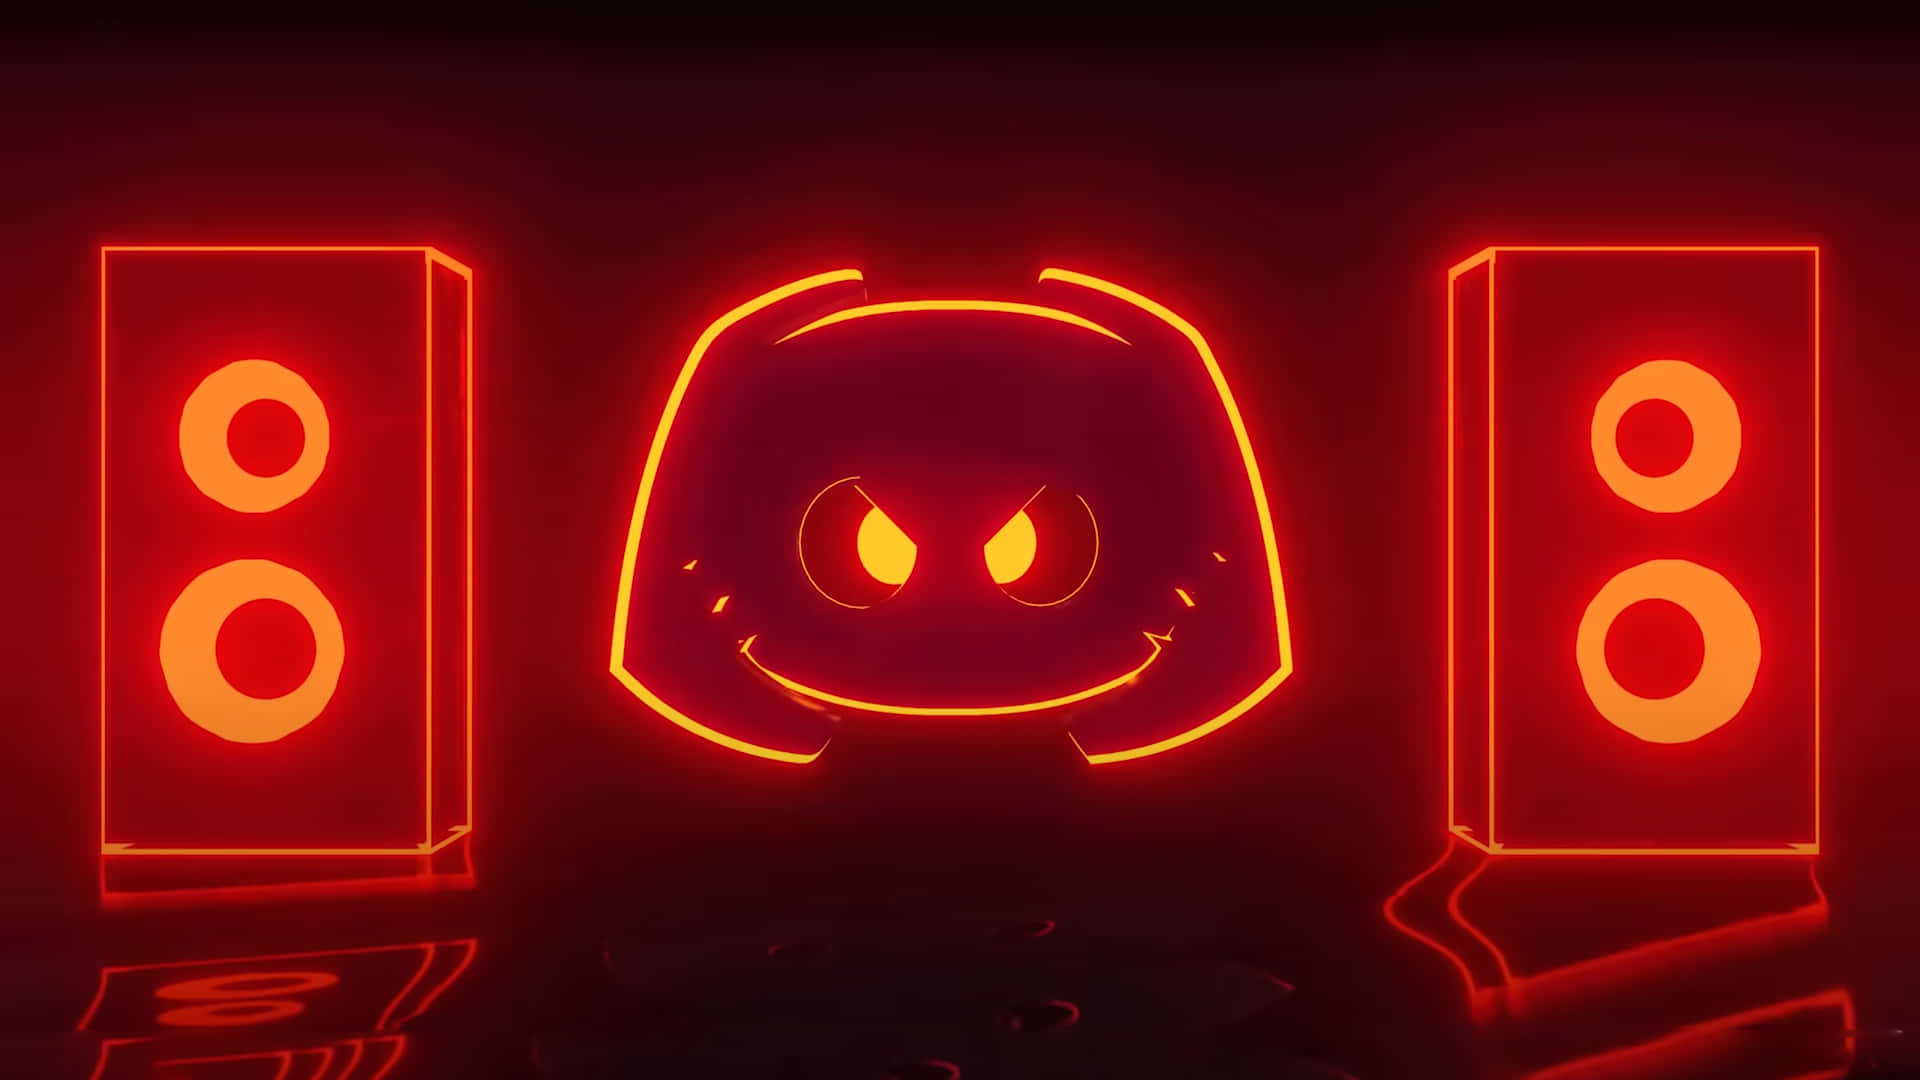 Cool Discord In Neon Red Wallpaper